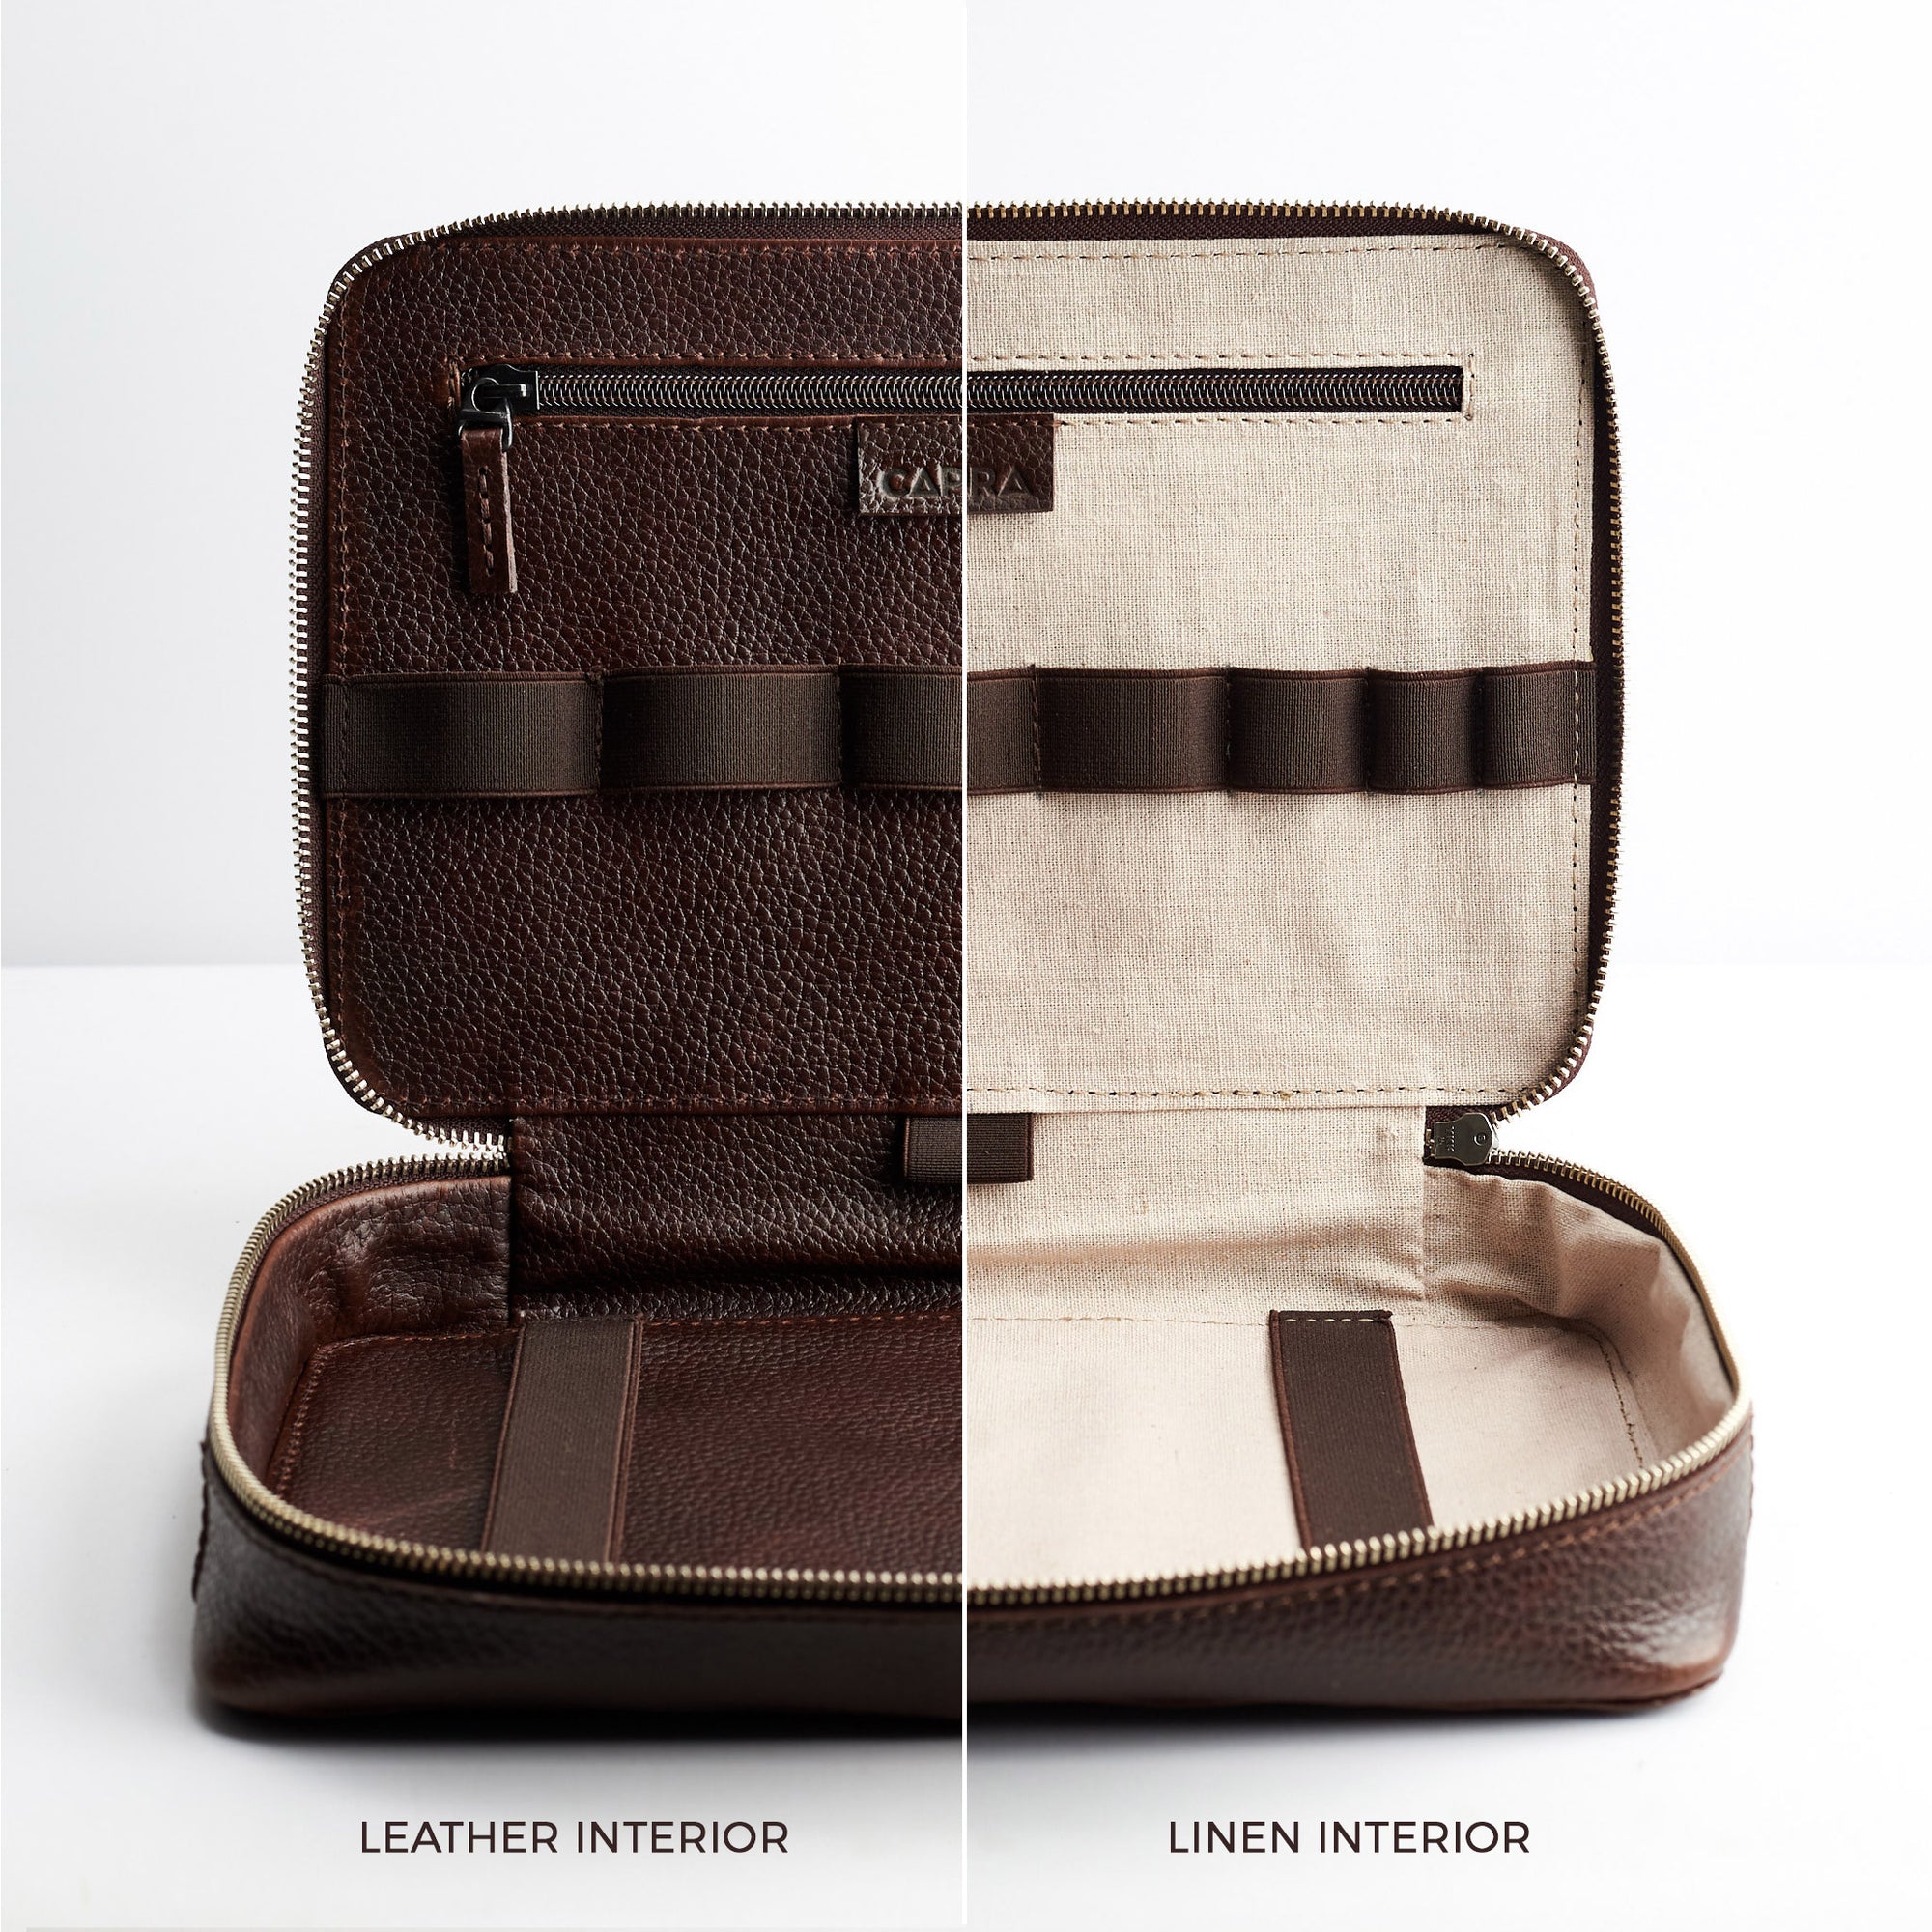 Leather or linen interior. Dark Brown travel electronics organizer by Capra Leather